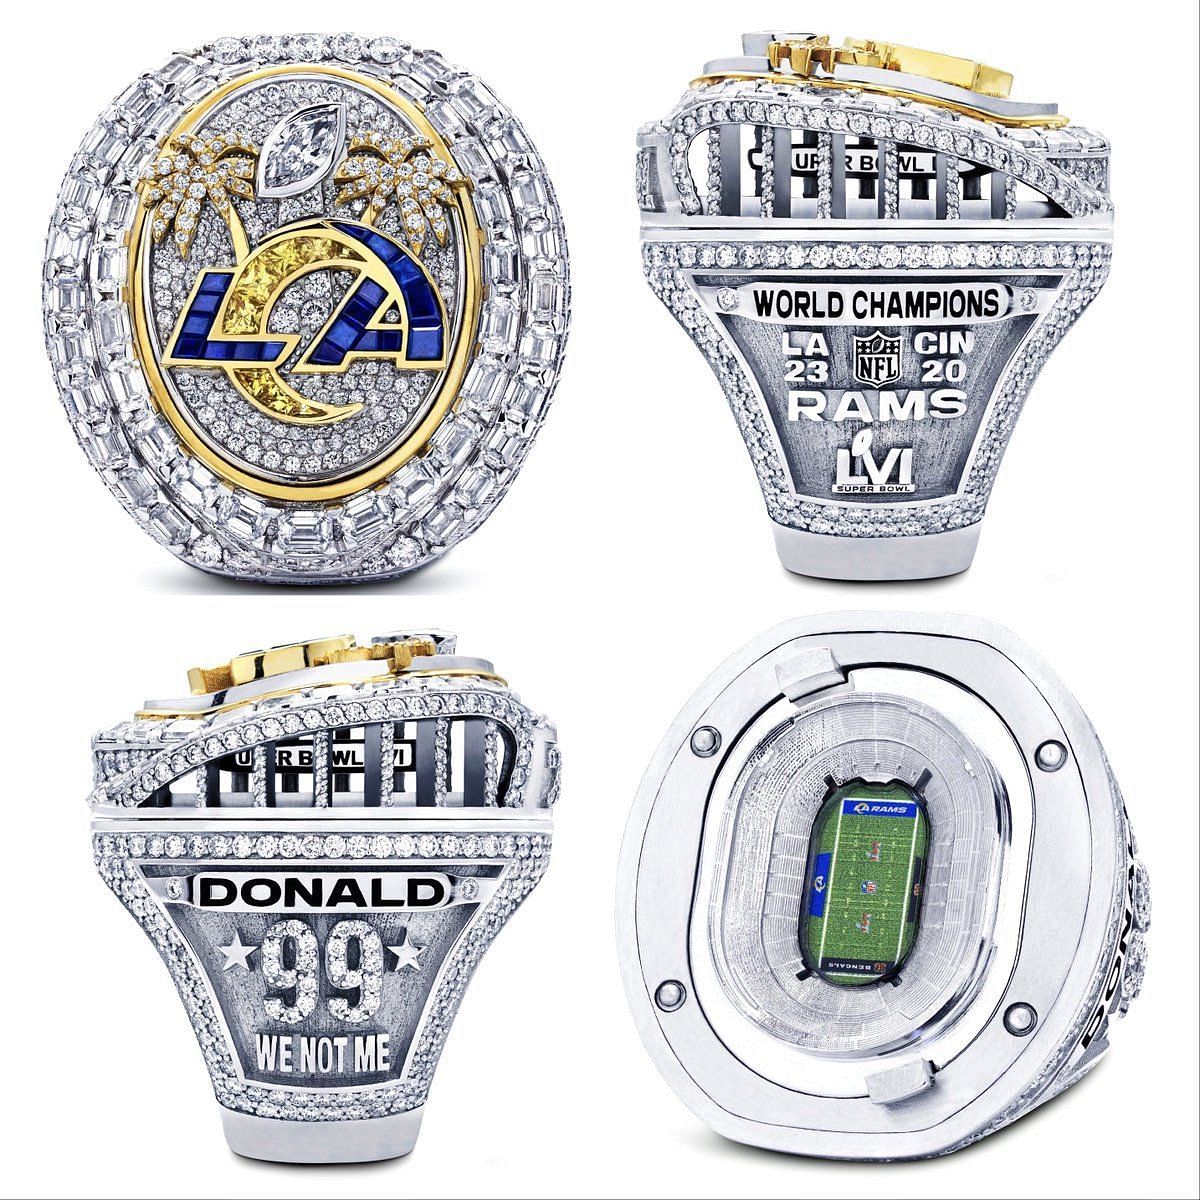 Rams only place one Lombardi Trophy on Super Bowl ring, ignoring